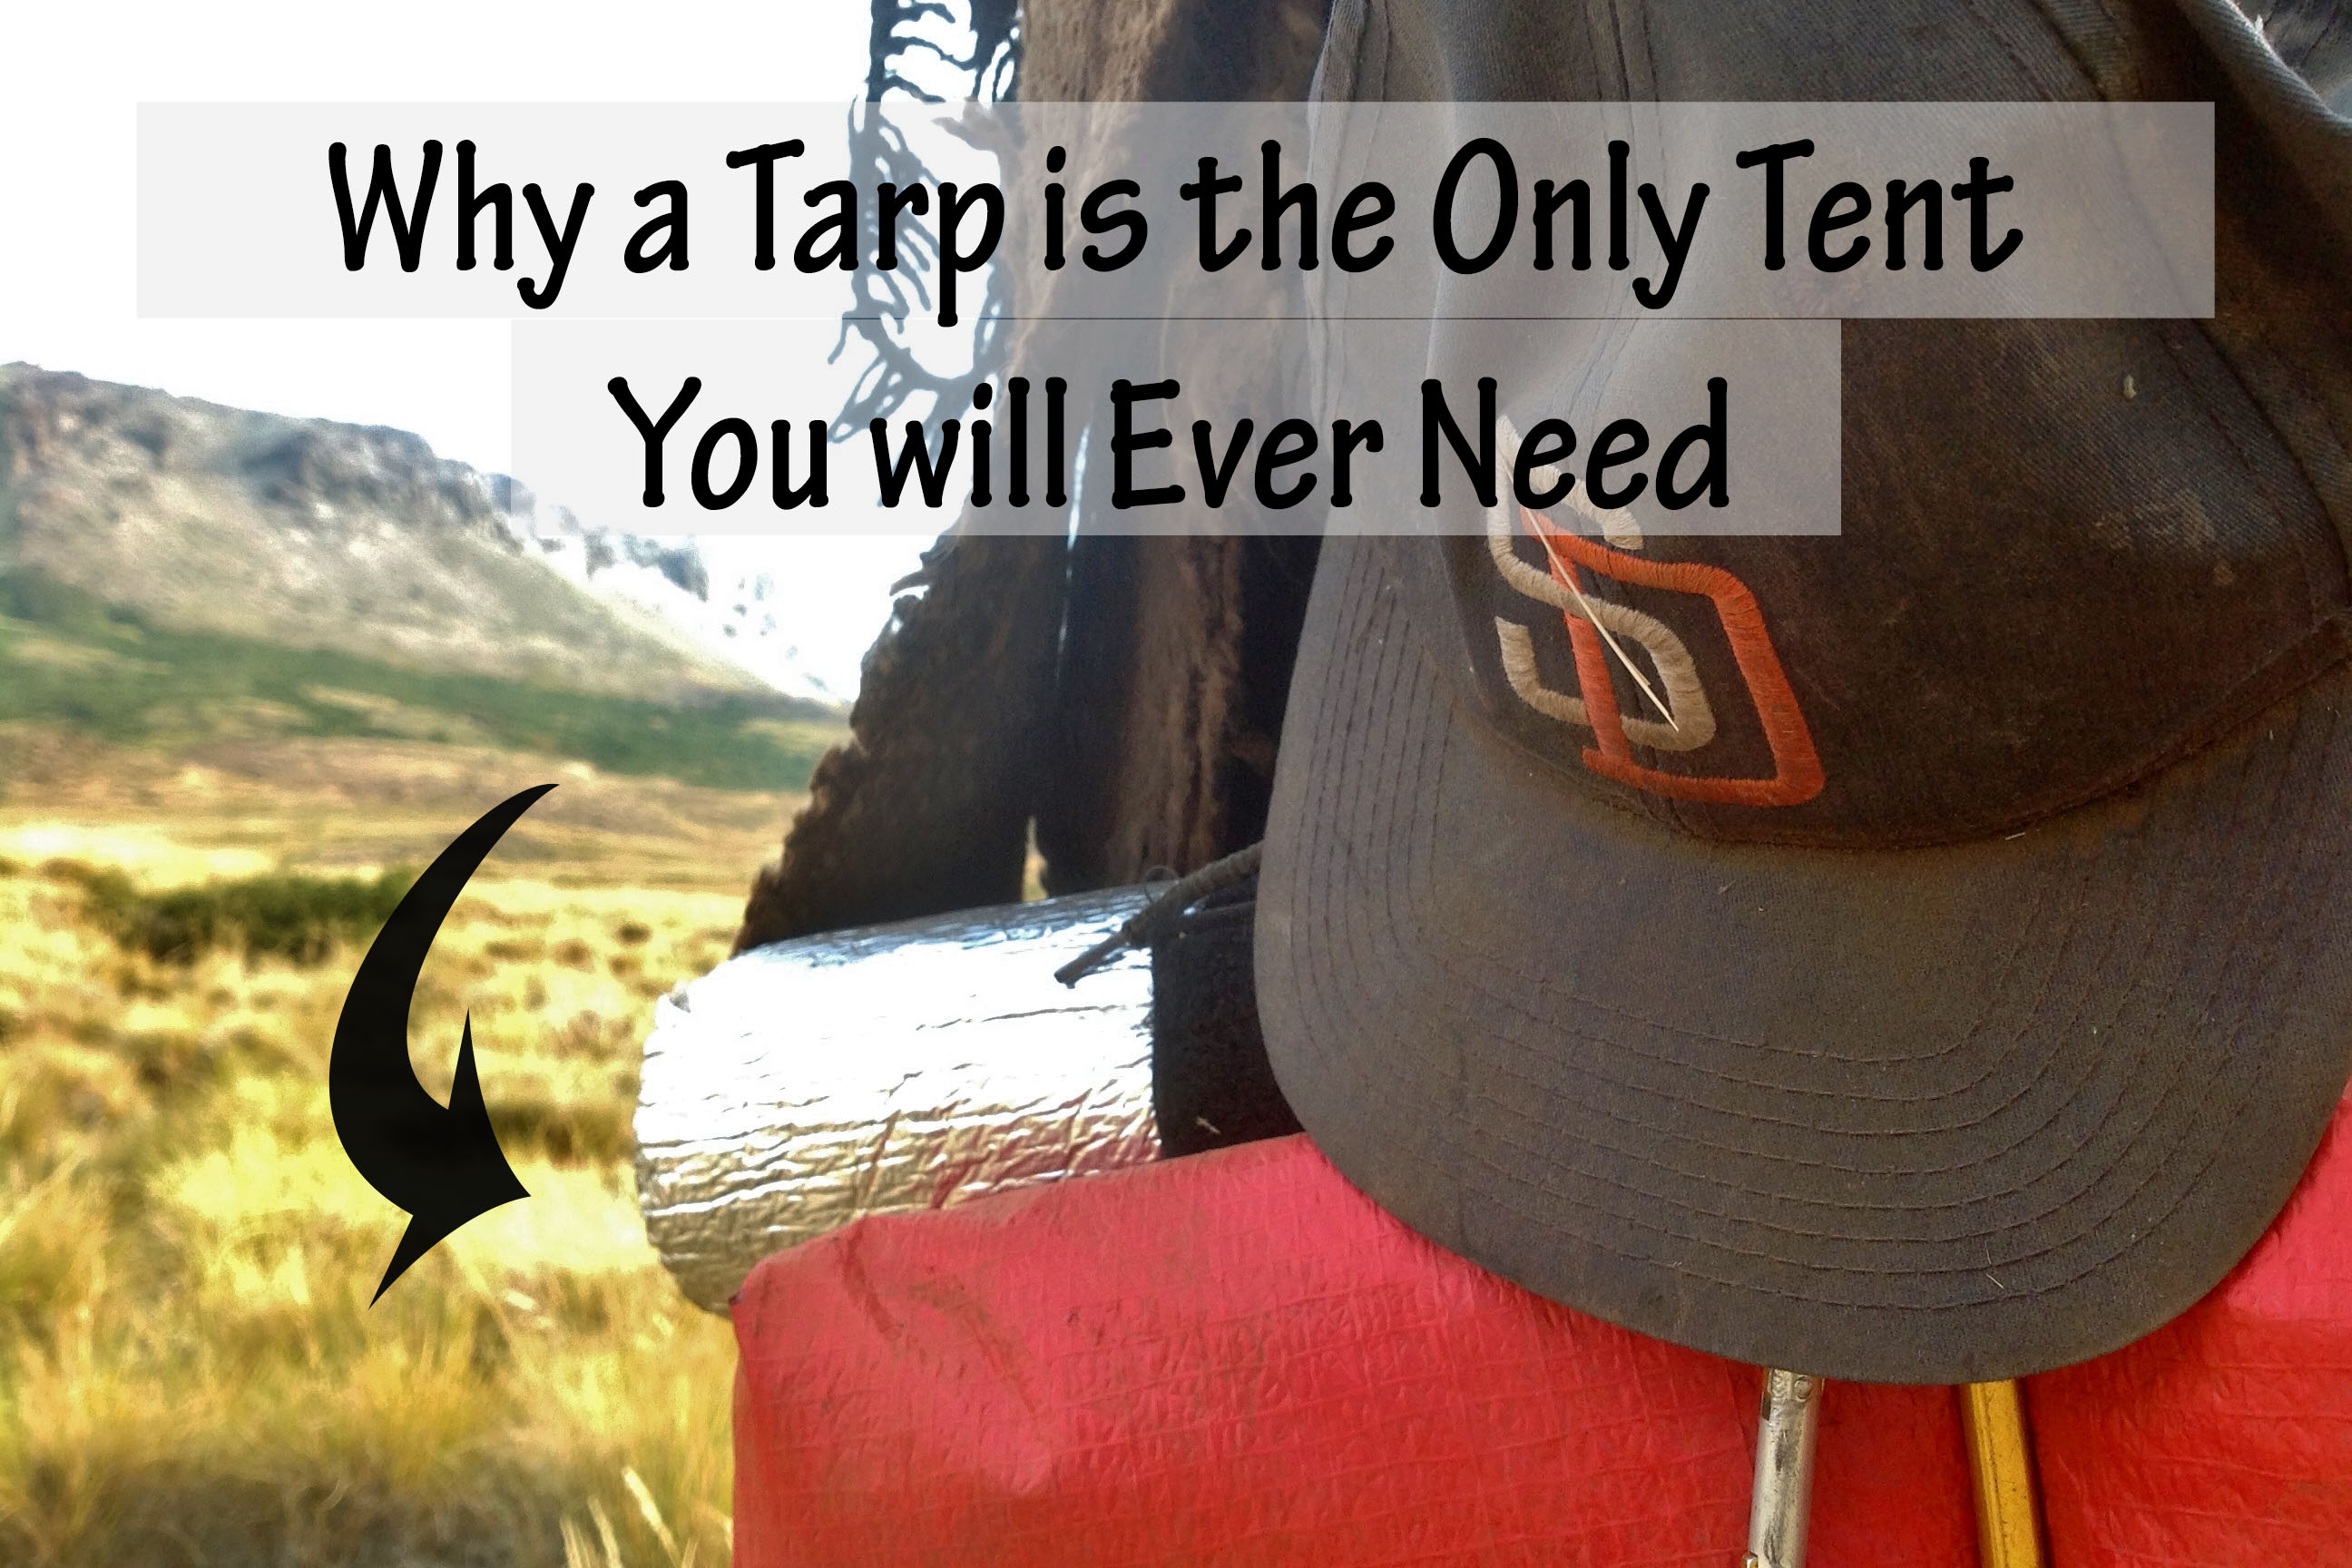 Why A Tarp Is the Only Tent You Will Ever Need